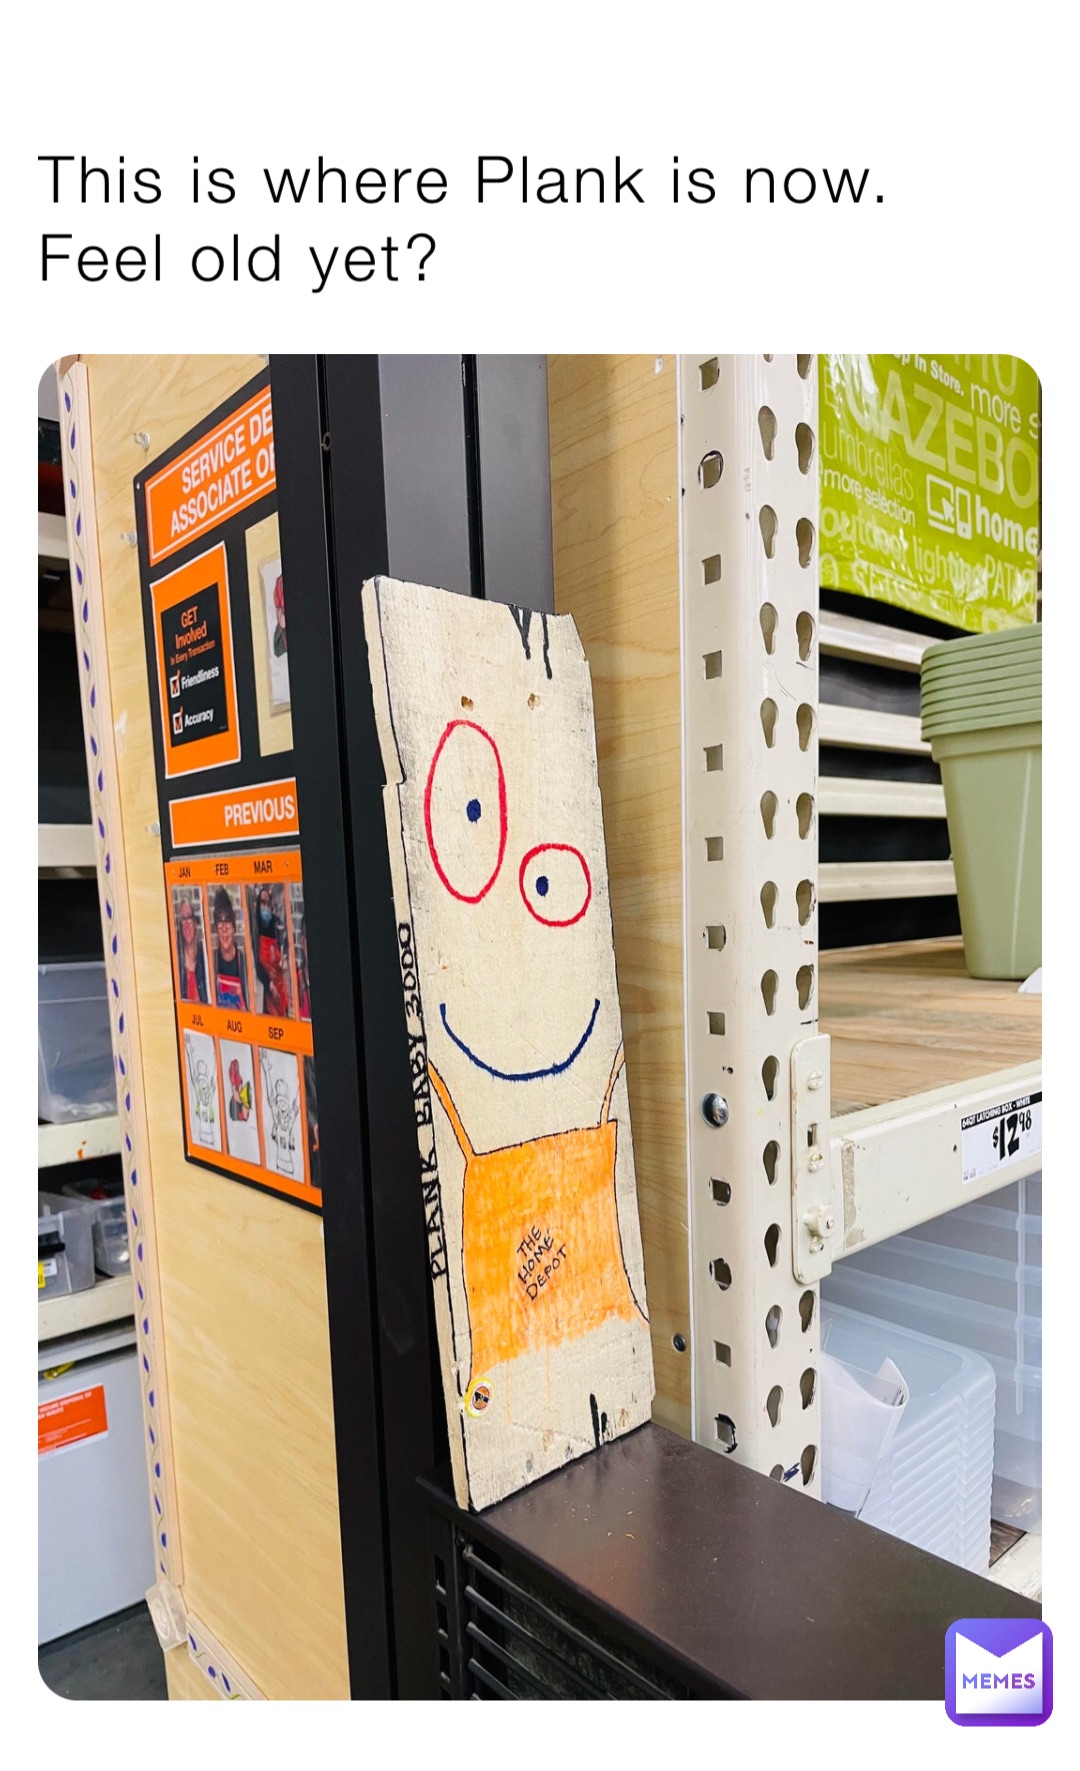 This is where Plank is now. Feel old yet?